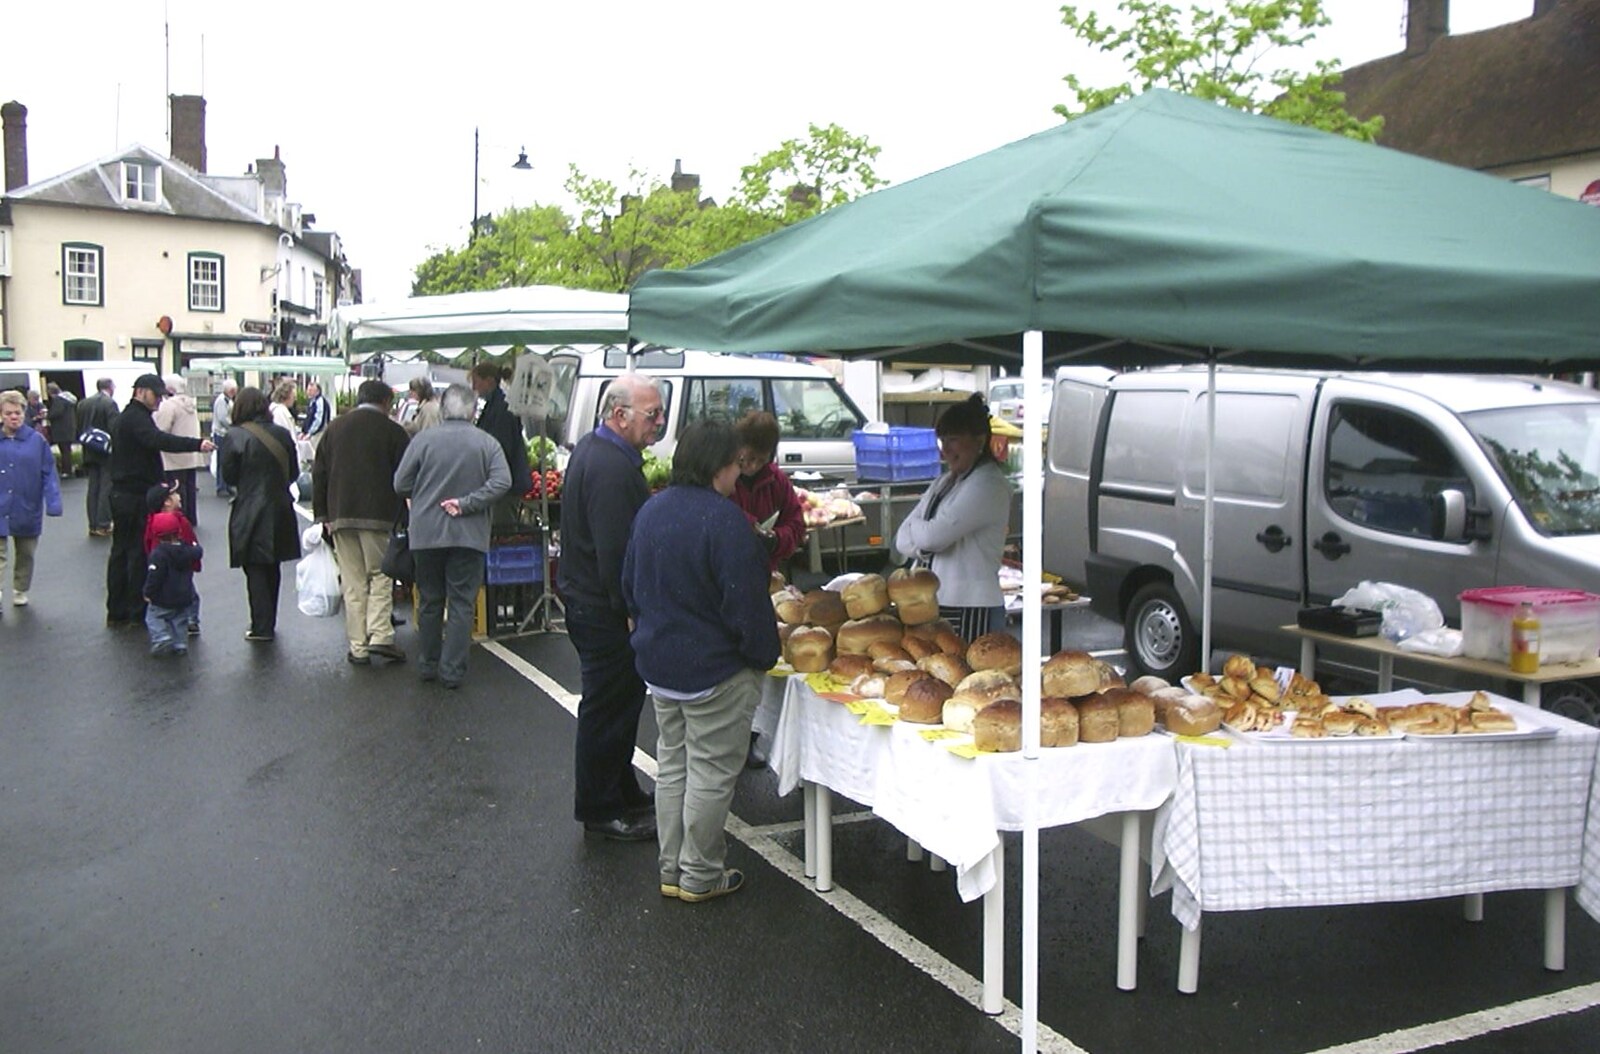 There's a food market in Lenham from A Trip Around Leeds Castle, Maidstone, Kent - 9th May 2004